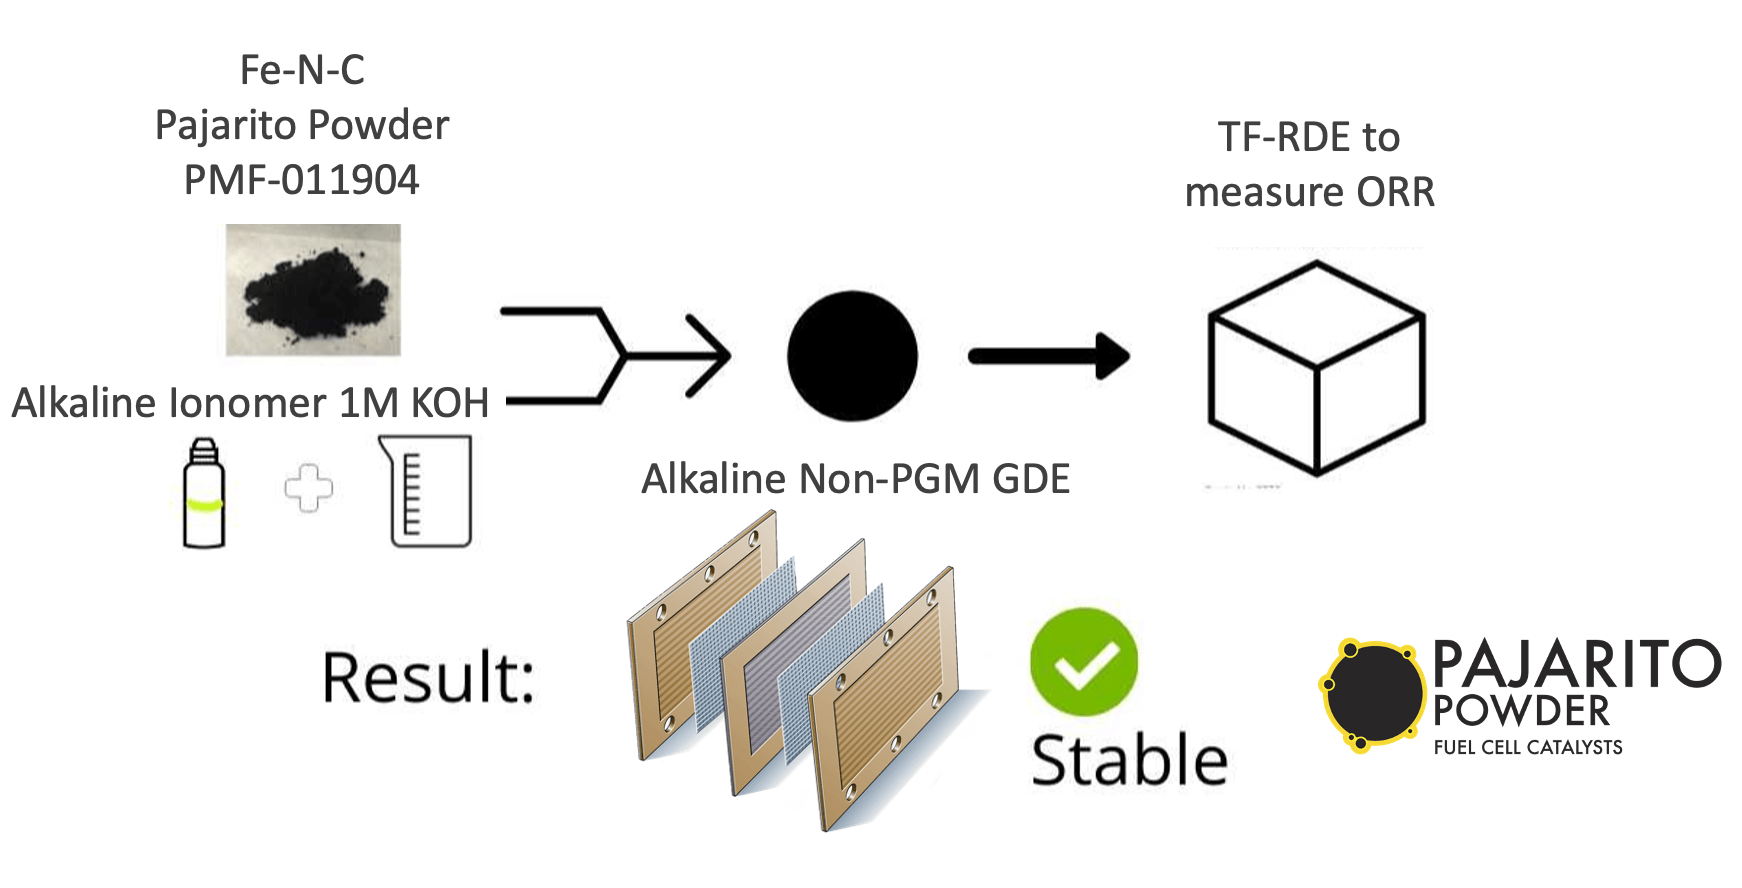 Stable PGM-free materials for AEMFC